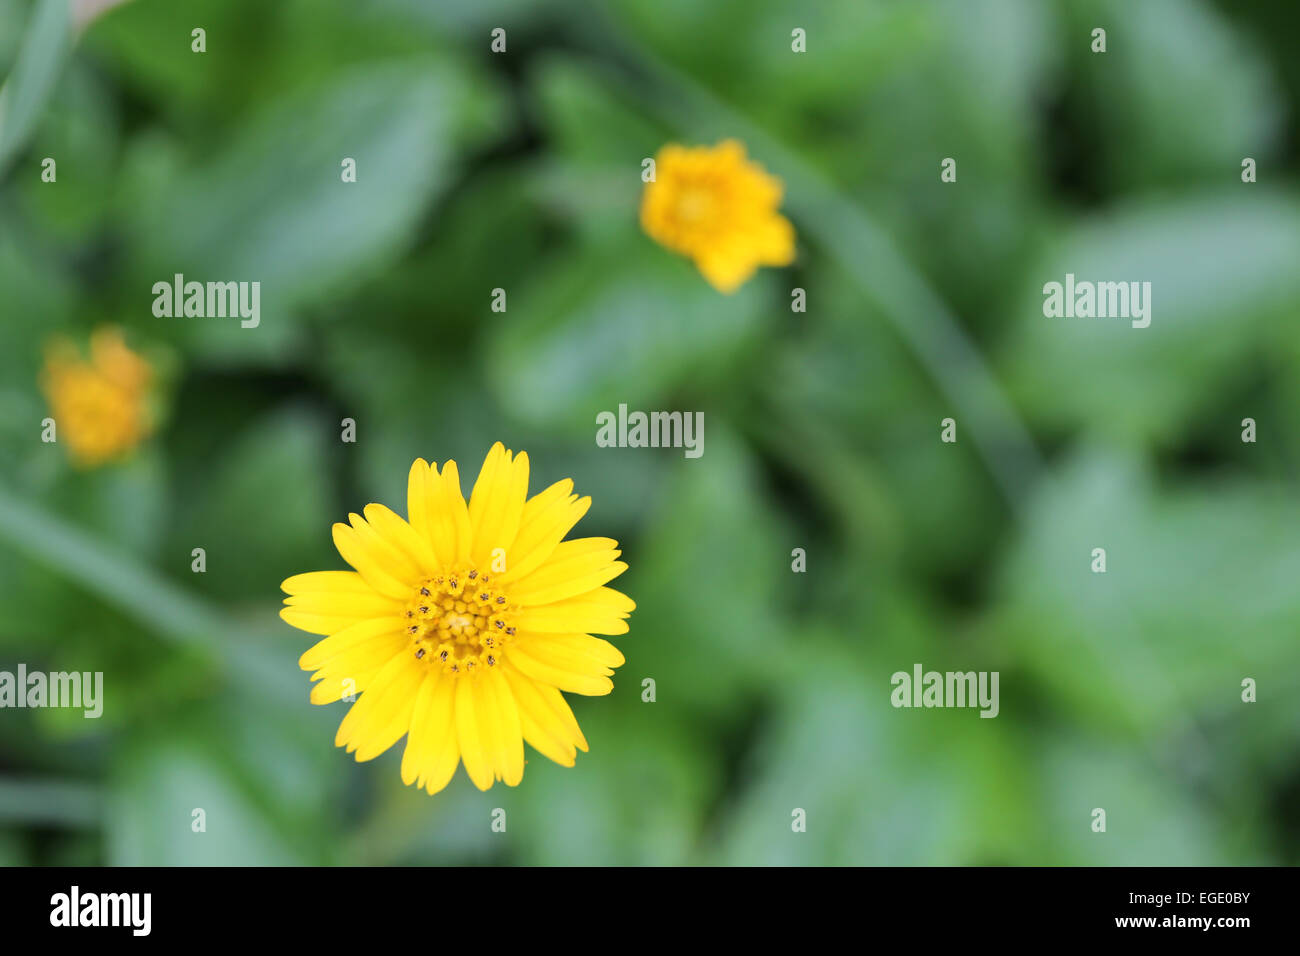 Yellow flowers on a backdrop of green foliage in the garden. Stock Photo